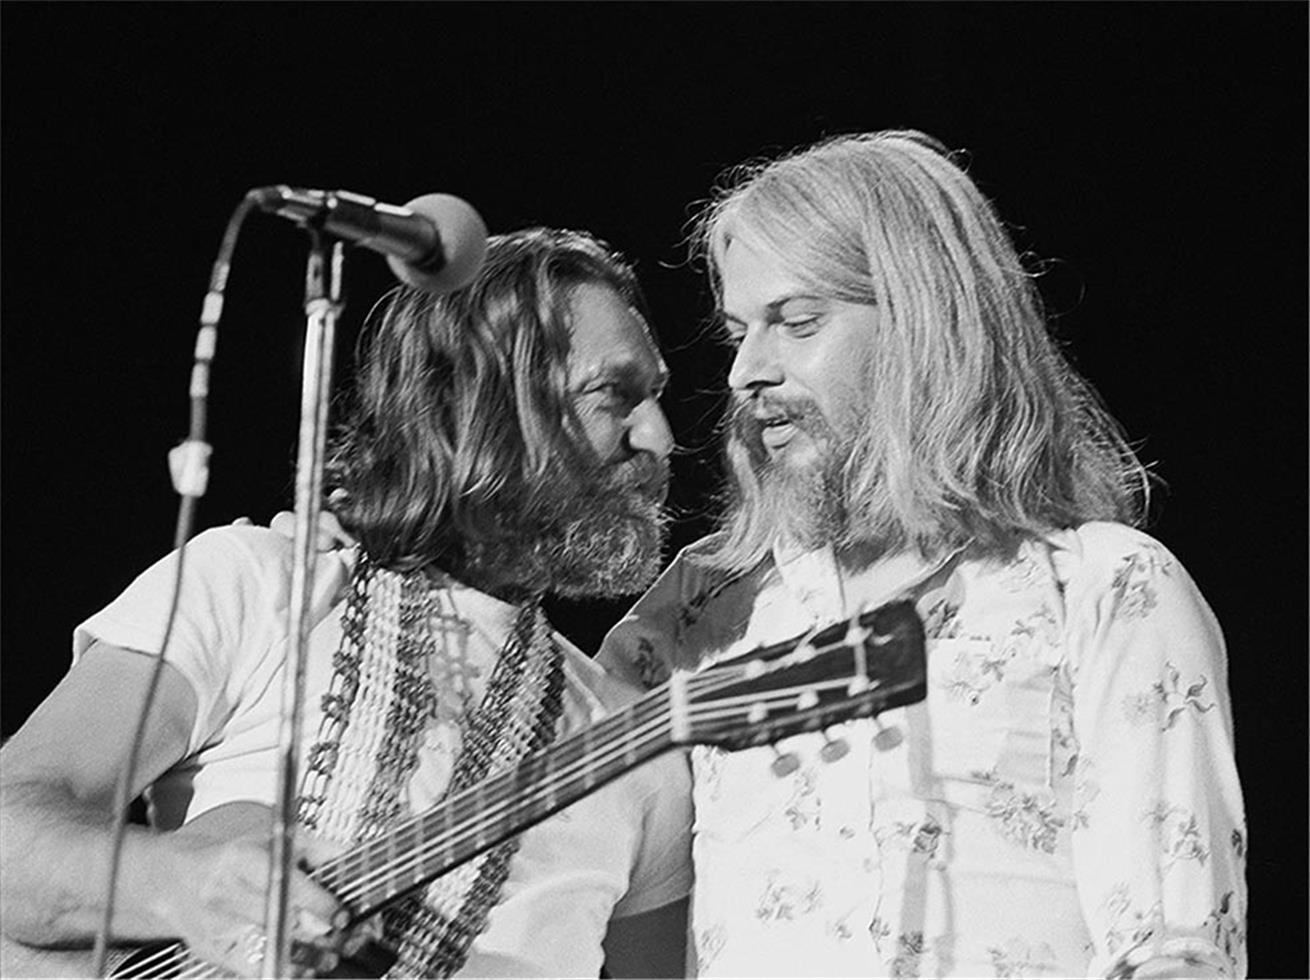  Charlyn Zlotnik Black and White Photograph - Willie Nelson and Leon Russell, 1976